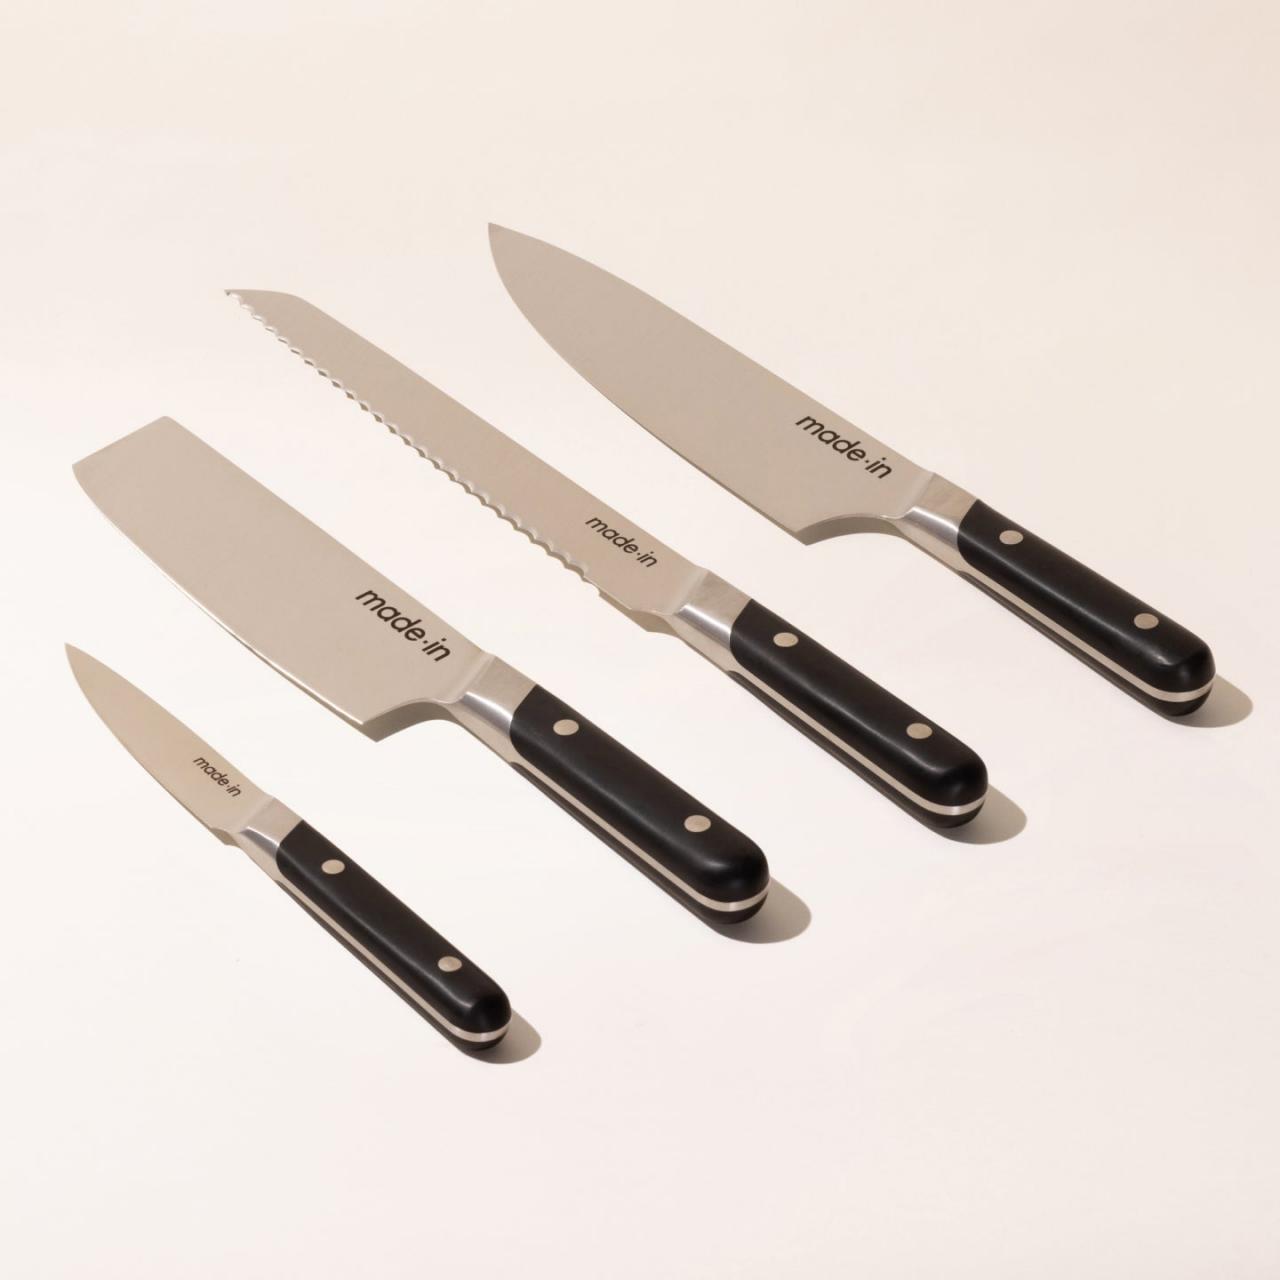 https://food.fnr.sndimg.com/content/dam/images/food/products/2023/11/21/rx_the-knife-set.jpeg.rend.hgtvcom.1280.1280.suffix/1700602622770.jpeg